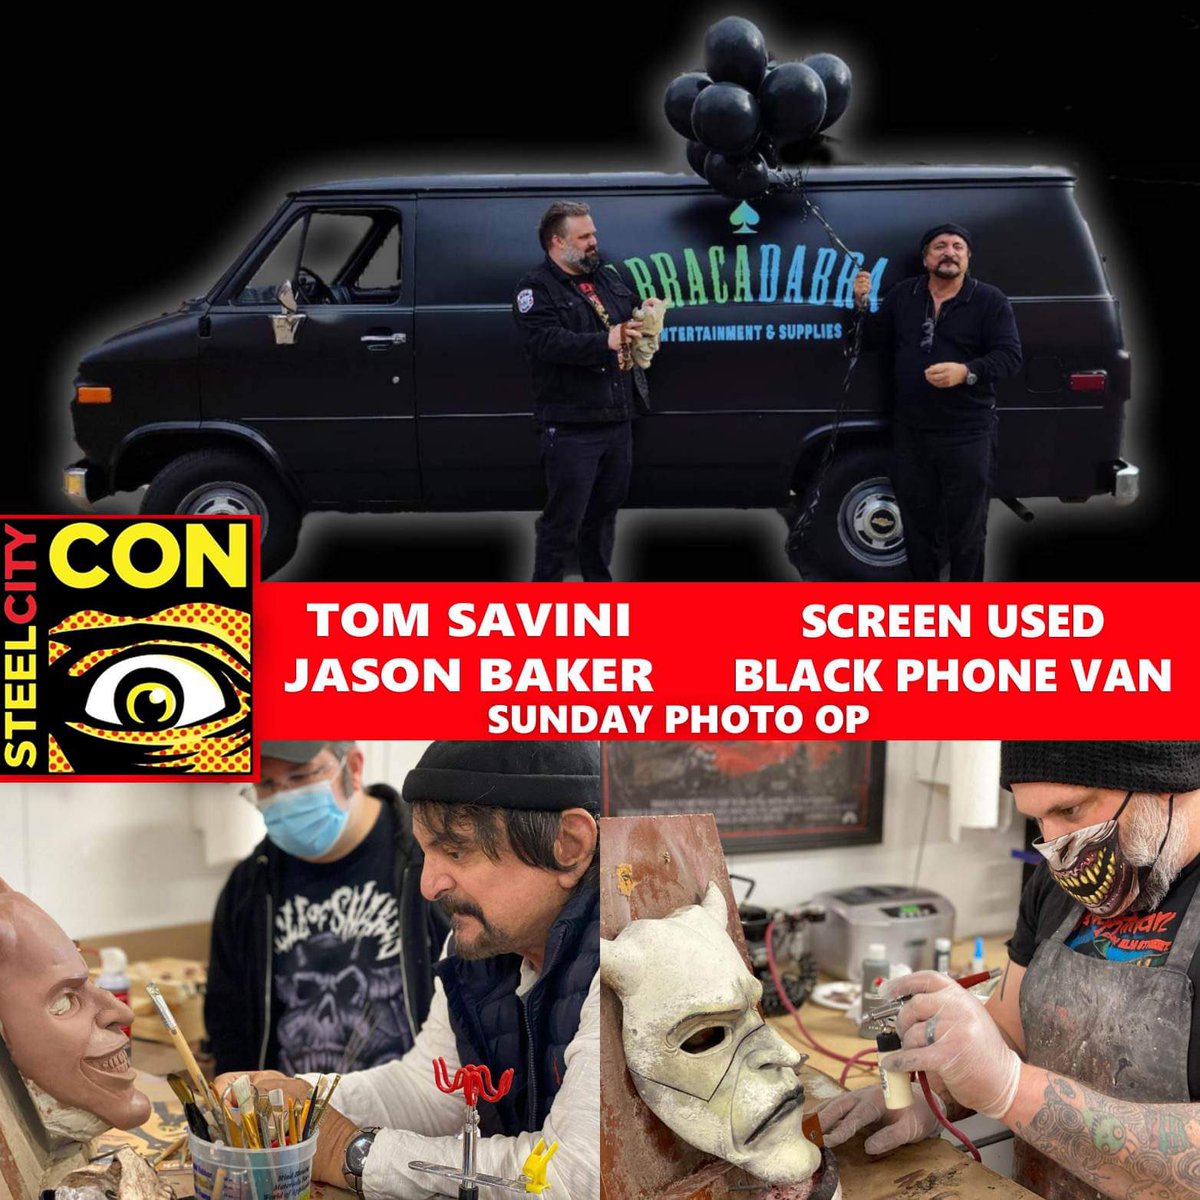 Announcement! @THETomSavini and I will be doing a photo op this Sunday at @Steelcitycon with the screen used “Grabber”van from THE BLACK PHONE. Hope to see you there.